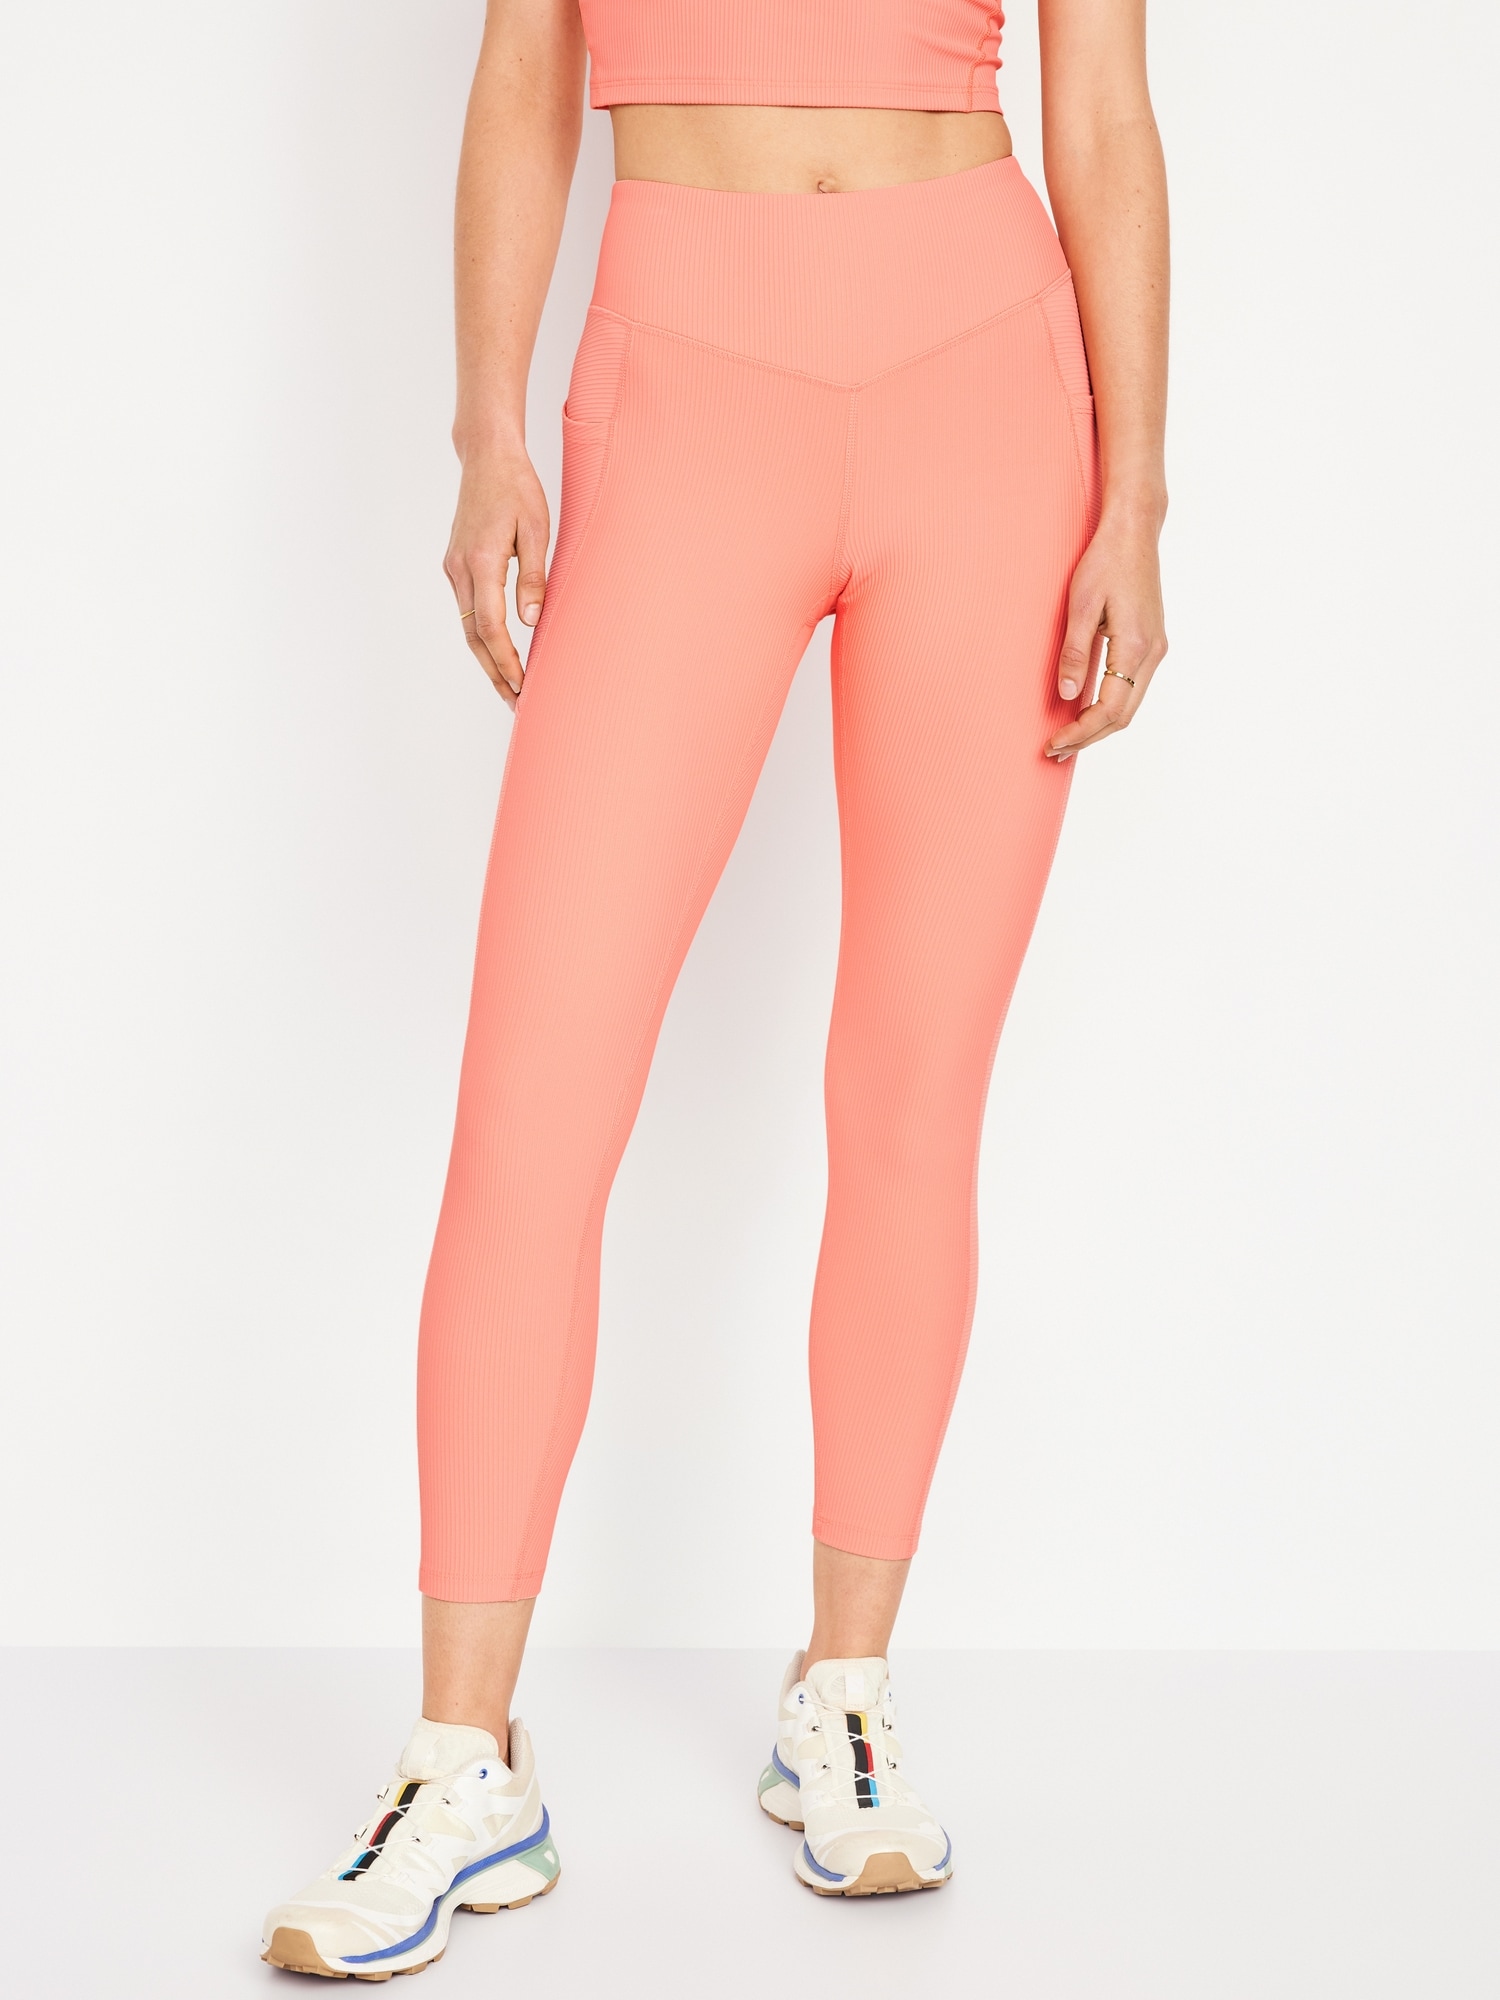 Fabletics Leggings Review. I love these leggings! I know if I'm